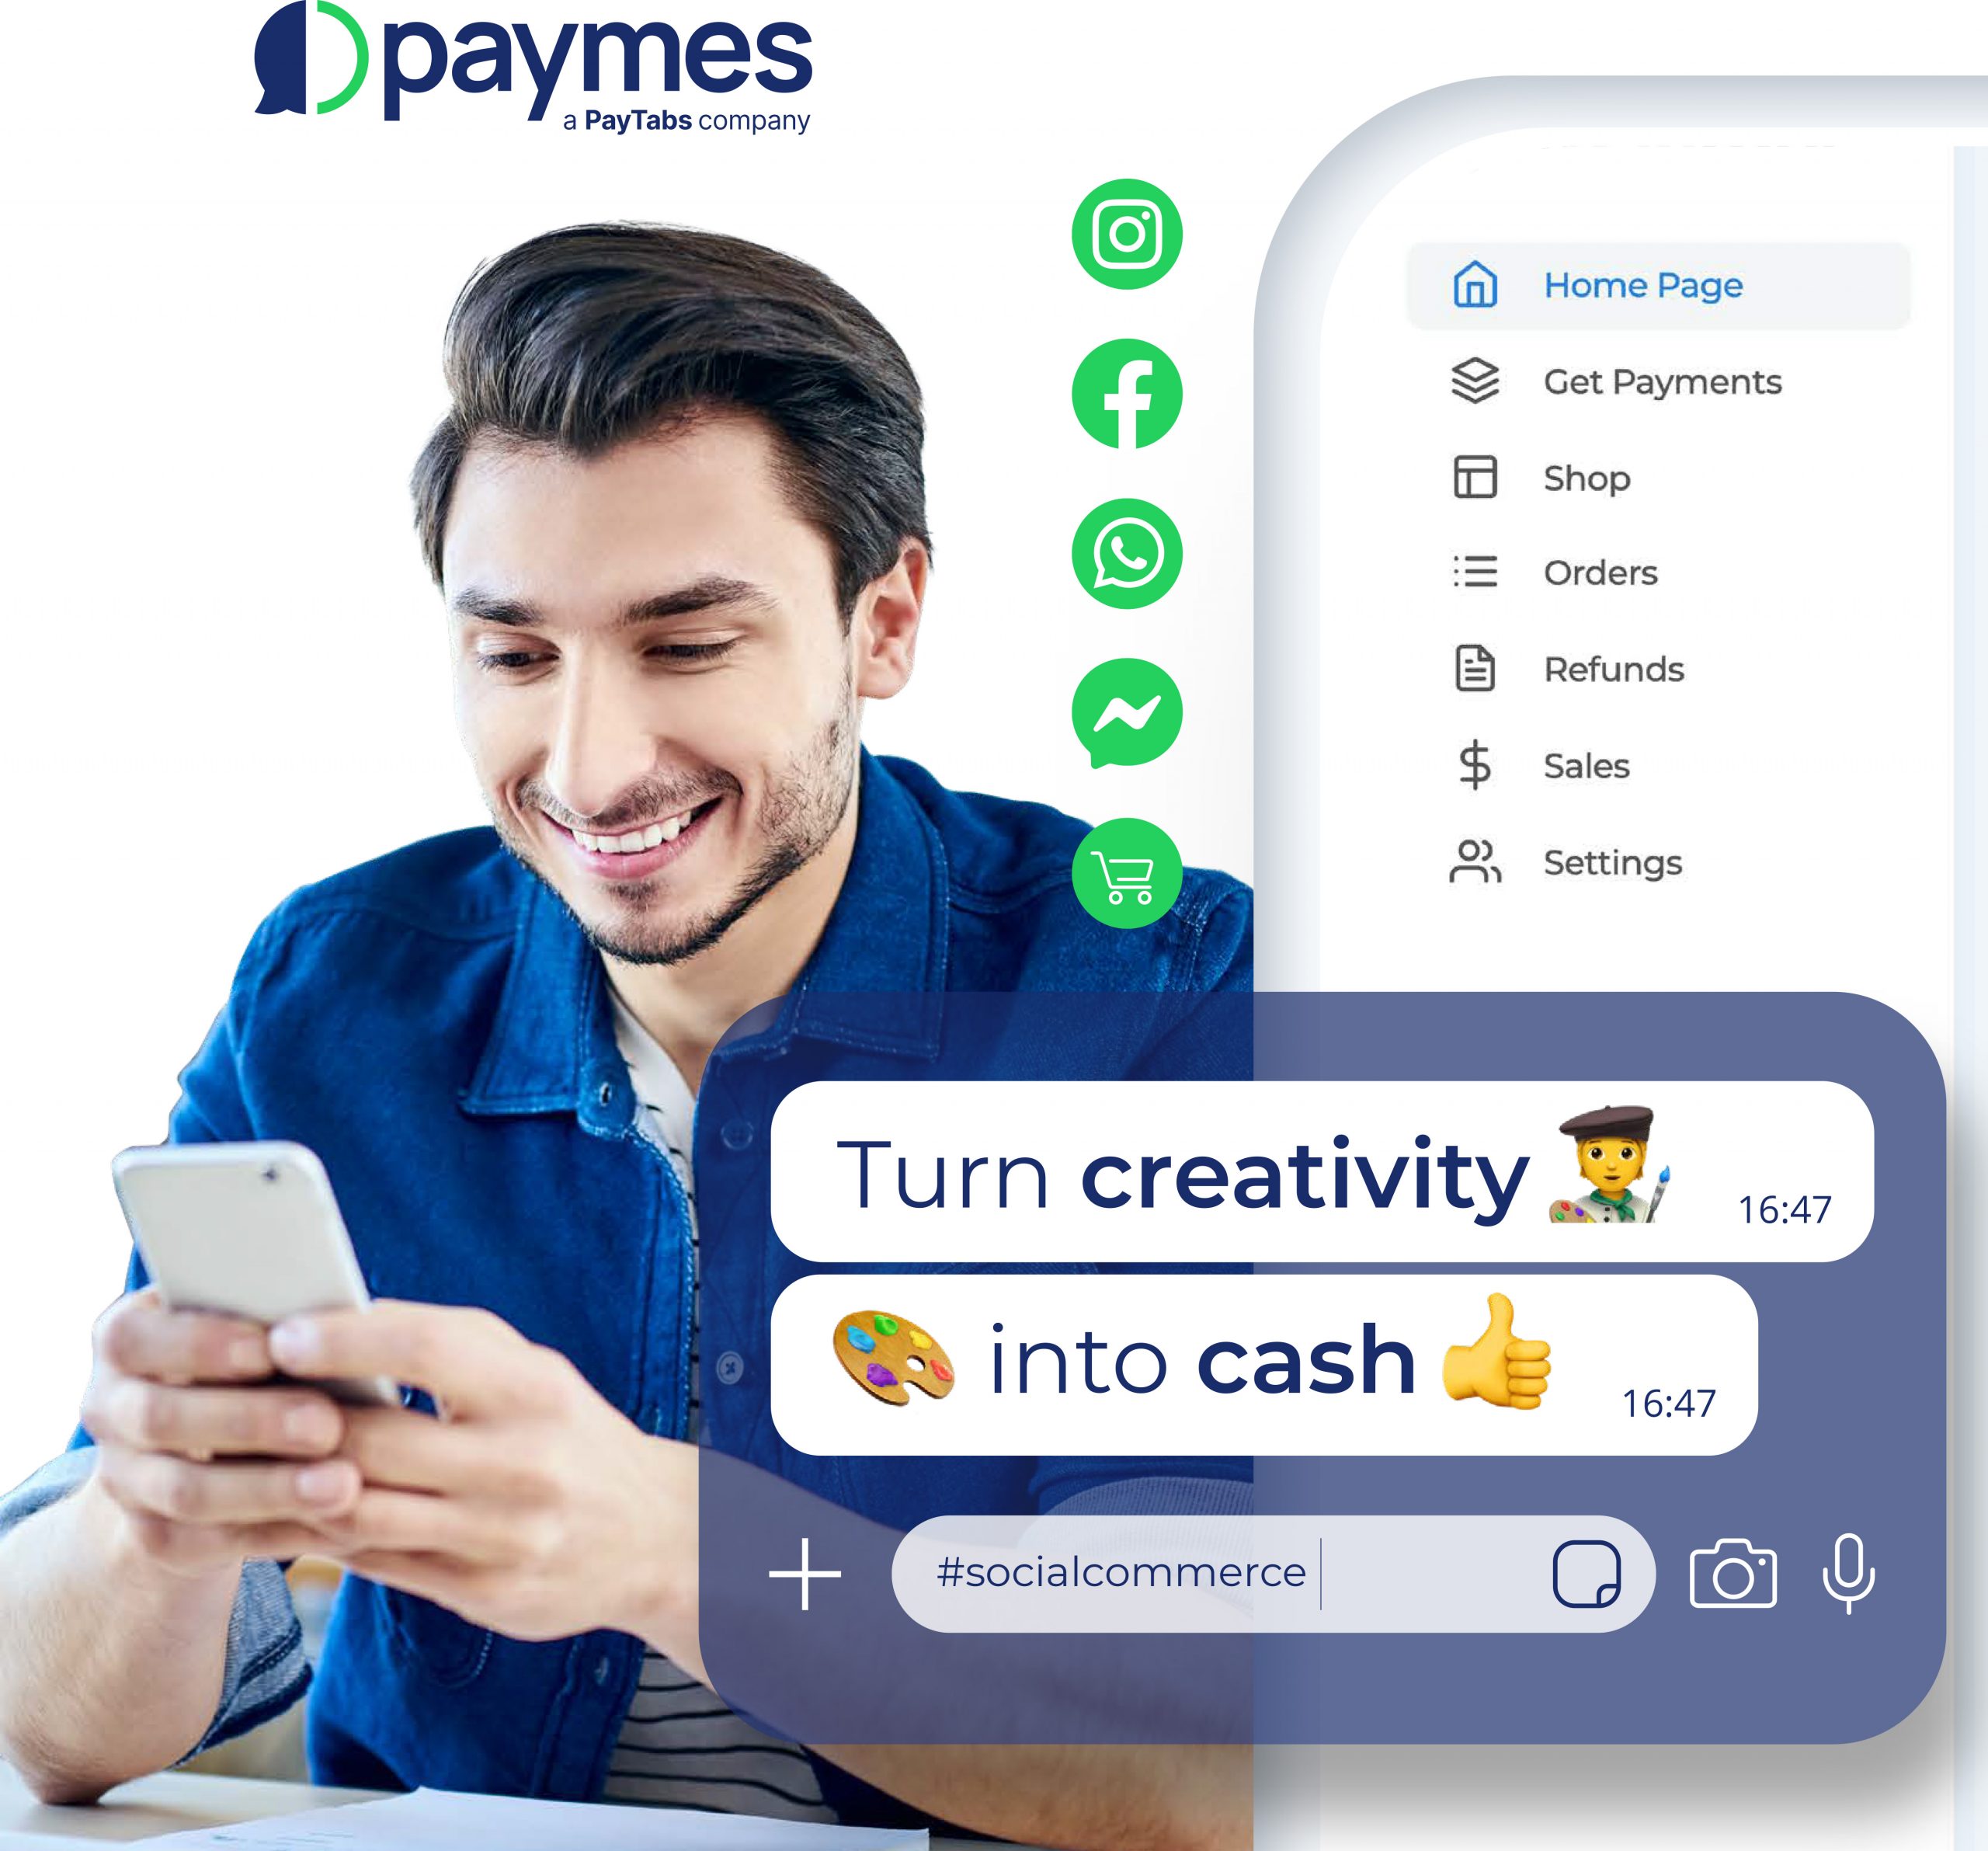 Paymes: Social Commerce Made Easy!